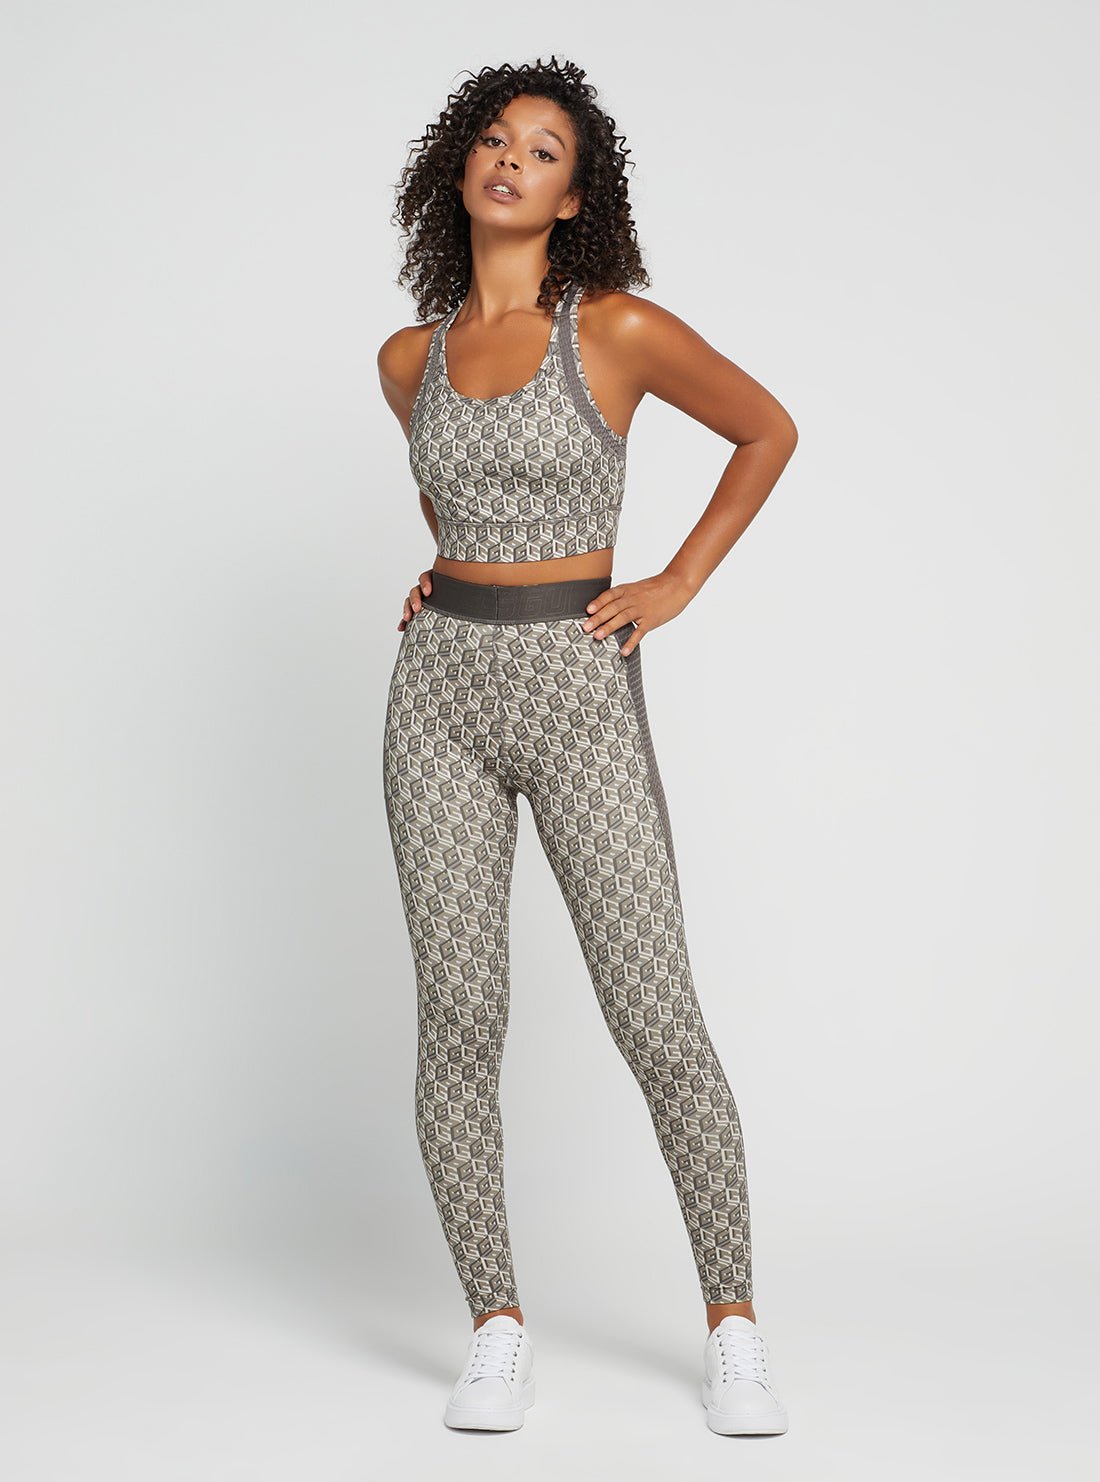 Women's Activewear, Tracksuits & More, Free Shipping Over $75